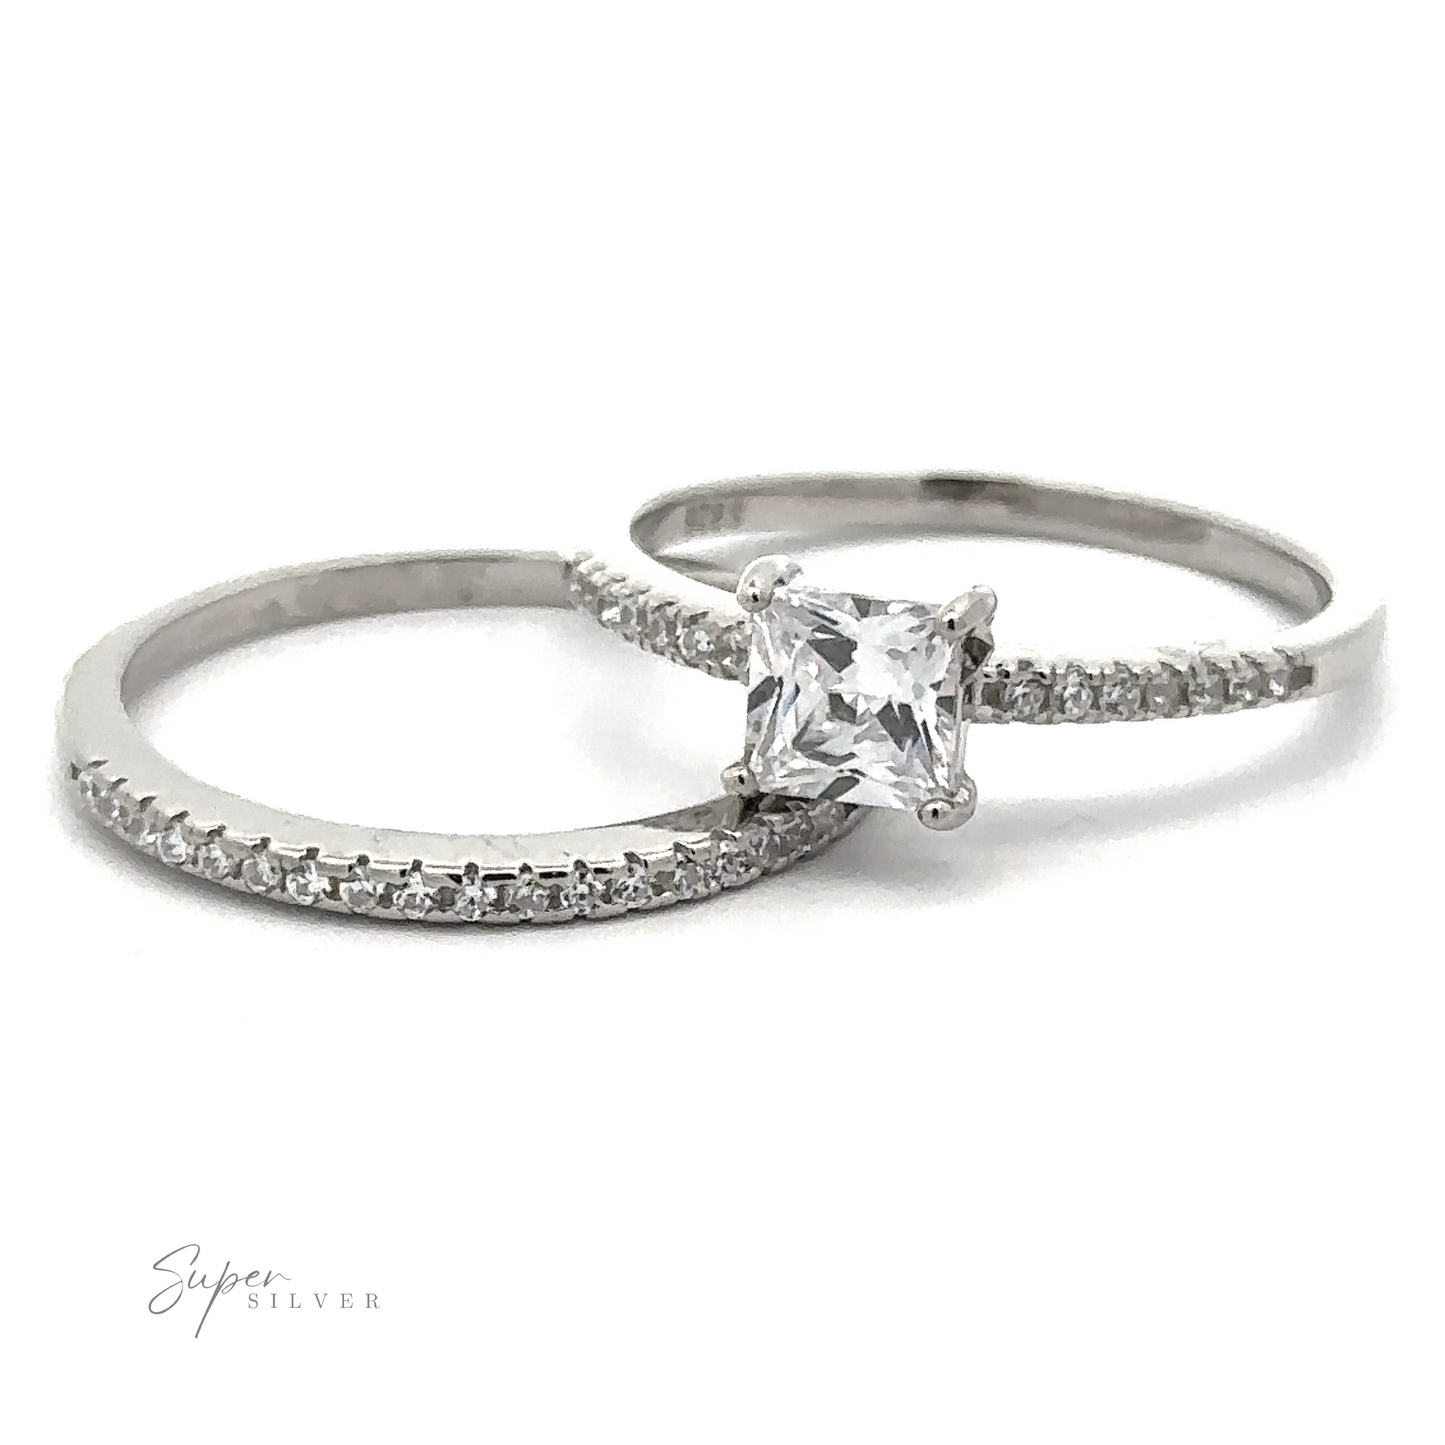 A pair of silver rings with small embedded stones, featuring a rhodium finish. One ring showcases a square-cut central stone, while the other is a simple band adorned with petite gems. This elegant Princess Cut Cubic Zirconia Wedding Band Set perfectly combines sophistication and timeless beauty.